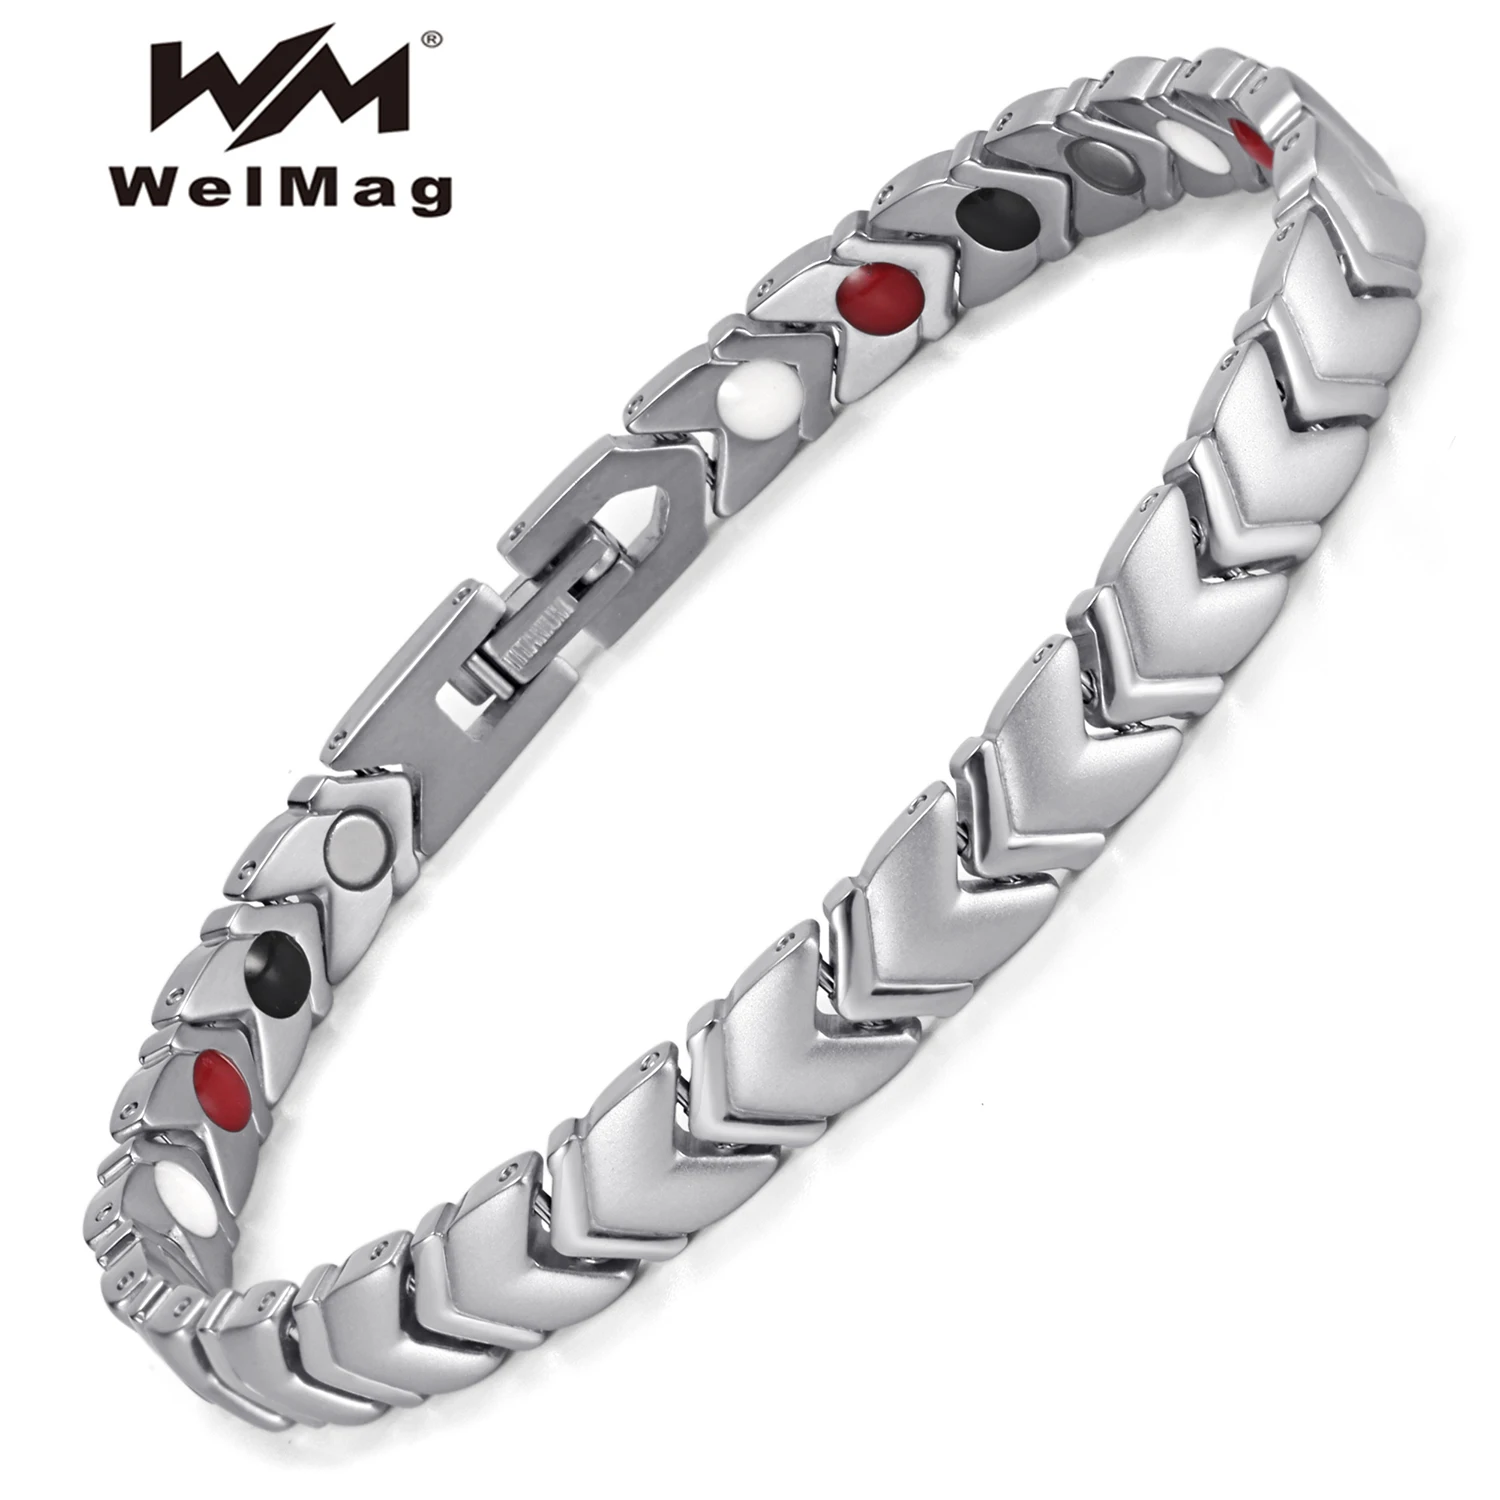 Welmag Titanium Healing Power Charm Bracelet Bangles For Women Jewelry Arrow Style  With 4 Elements Magnetic Couples Accessories